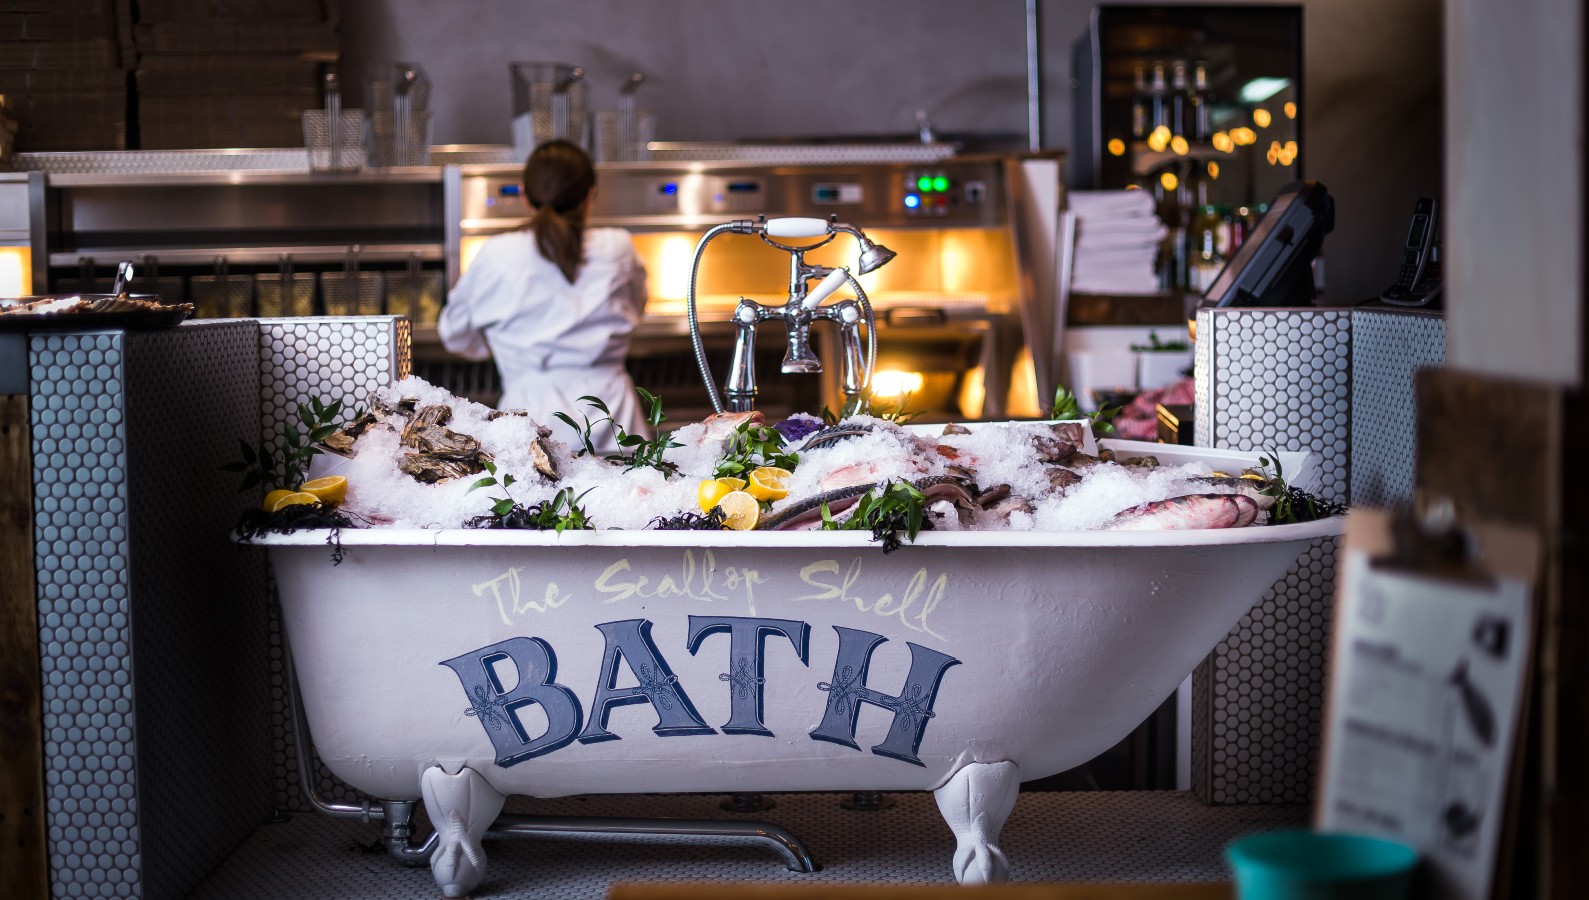 Seafood and shellfish served on ice in a miniature bathtub in the Scallop Shell restaurant in Bath